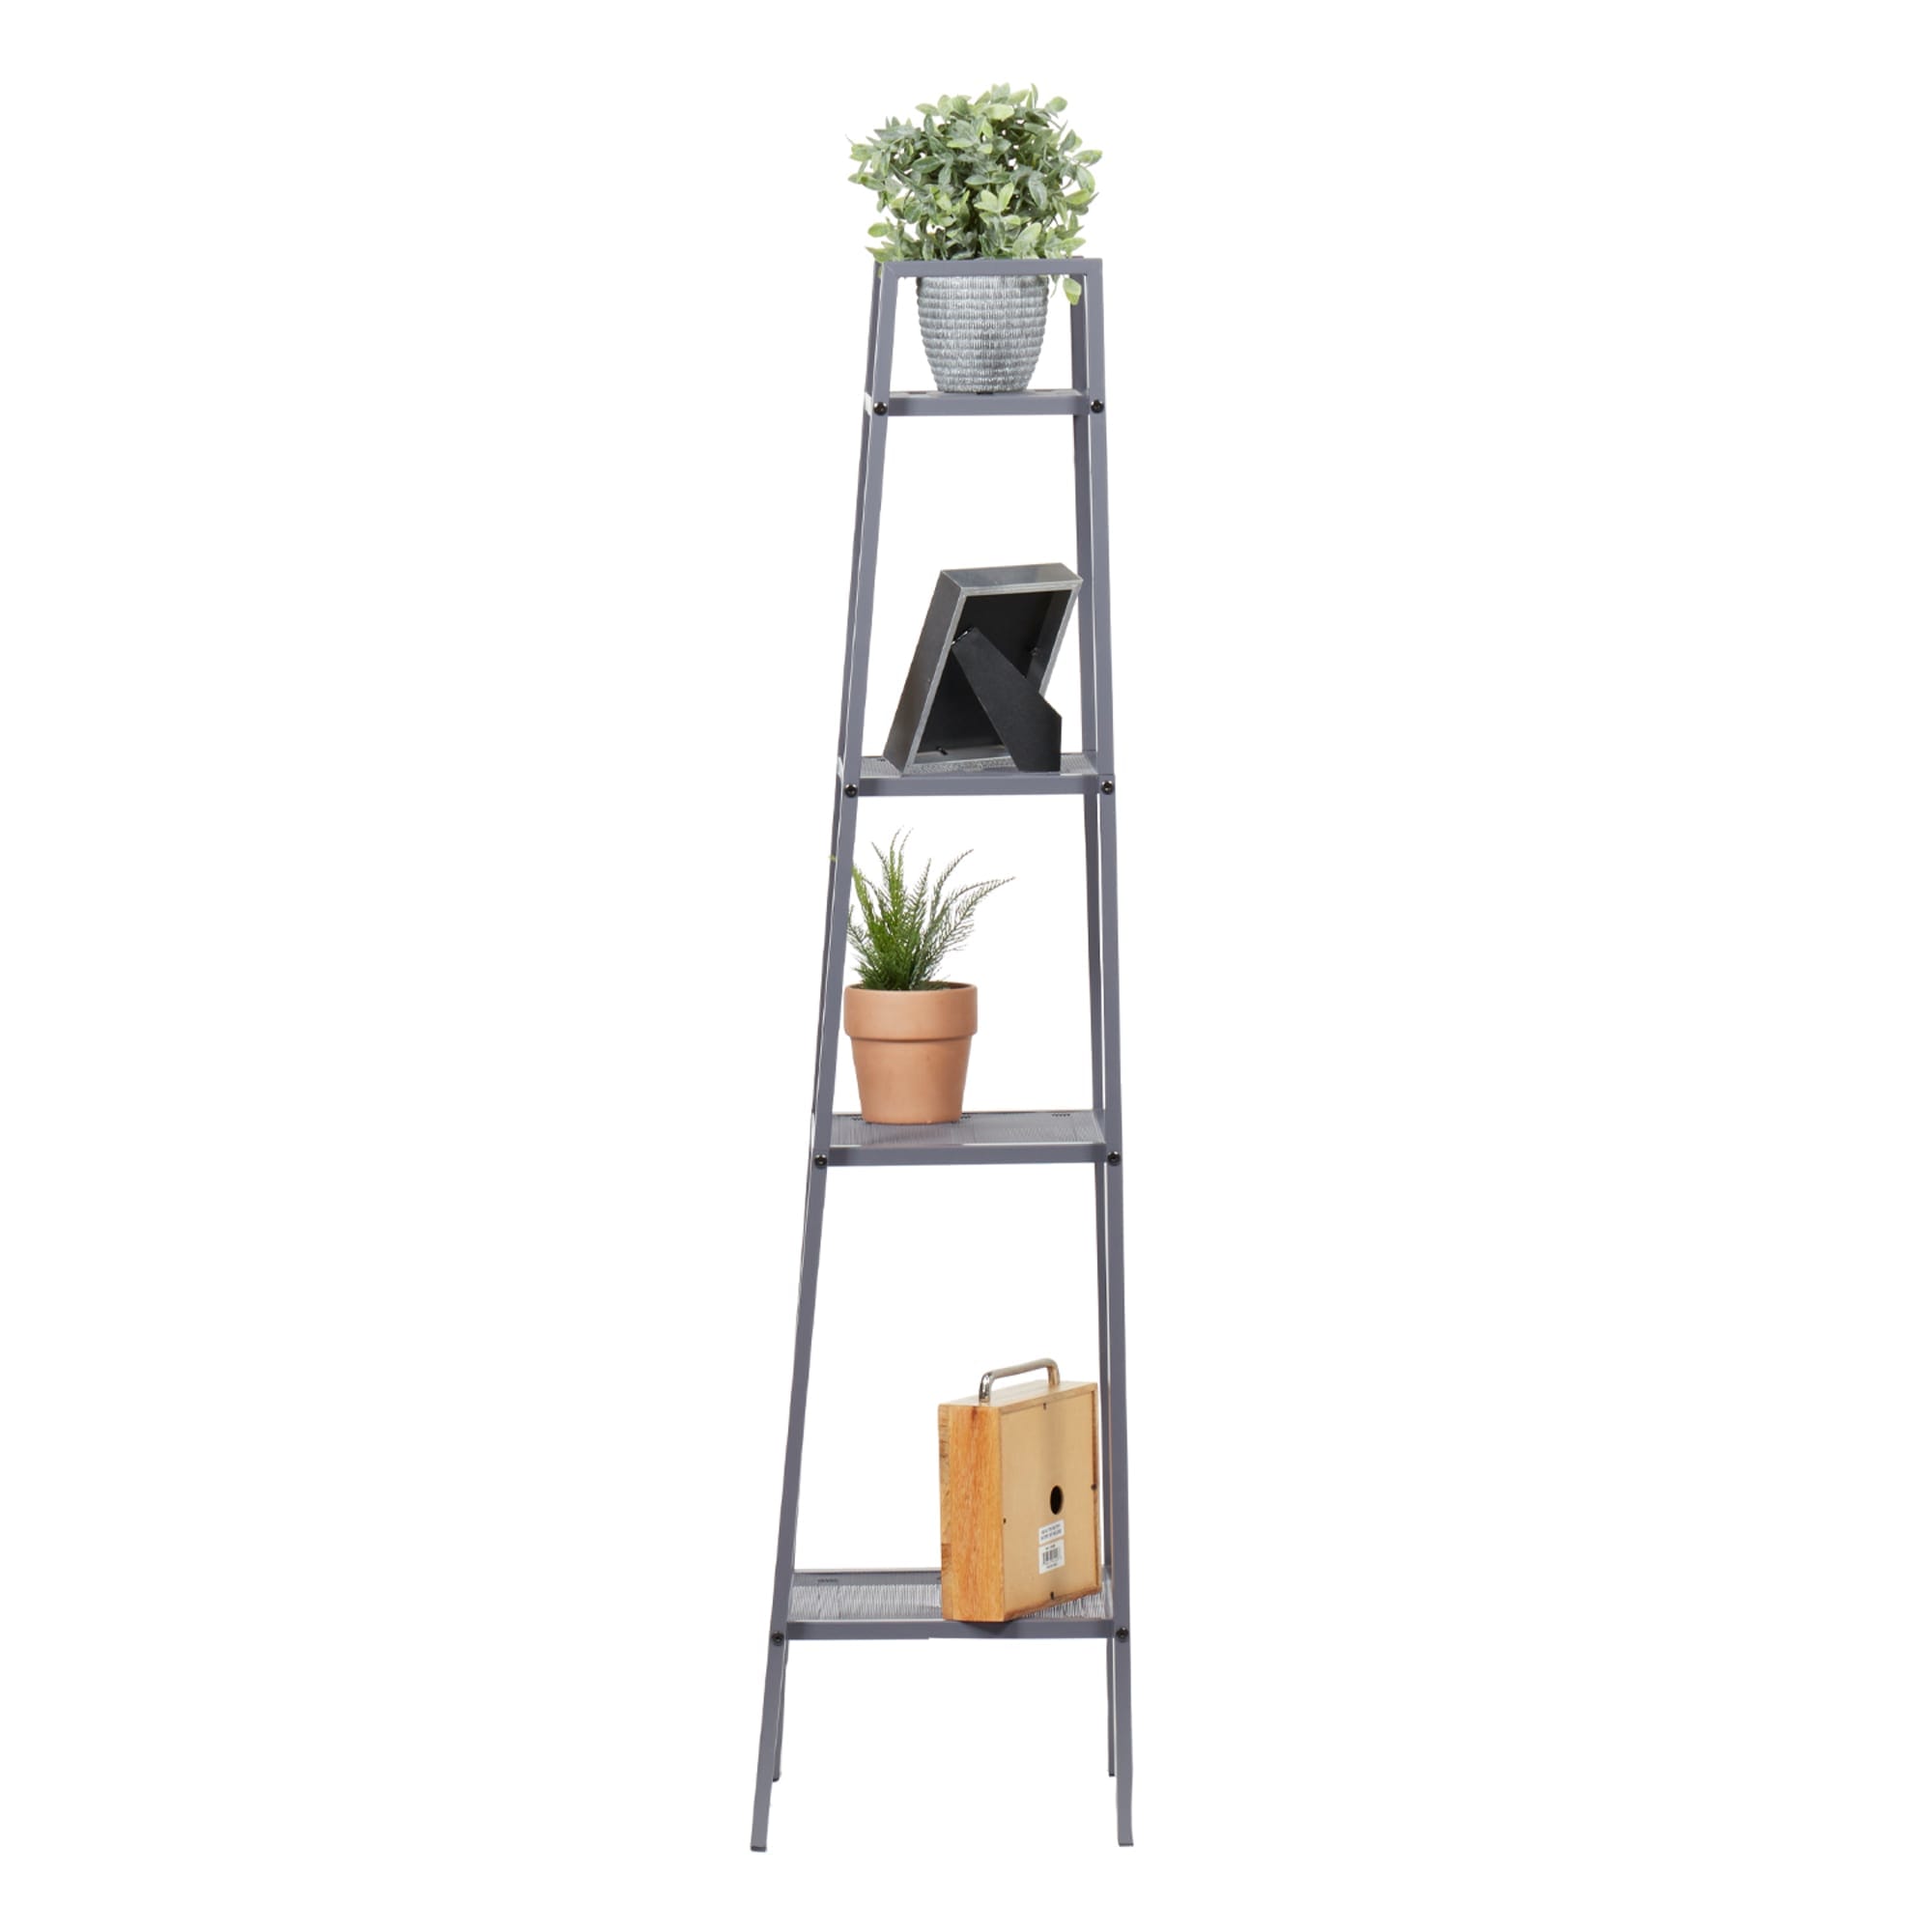 Home Basics Small 4 Tier Metal Rack, (14” x 14” x 58”), Grey $40.00 EACH, CASE PACK OF 1